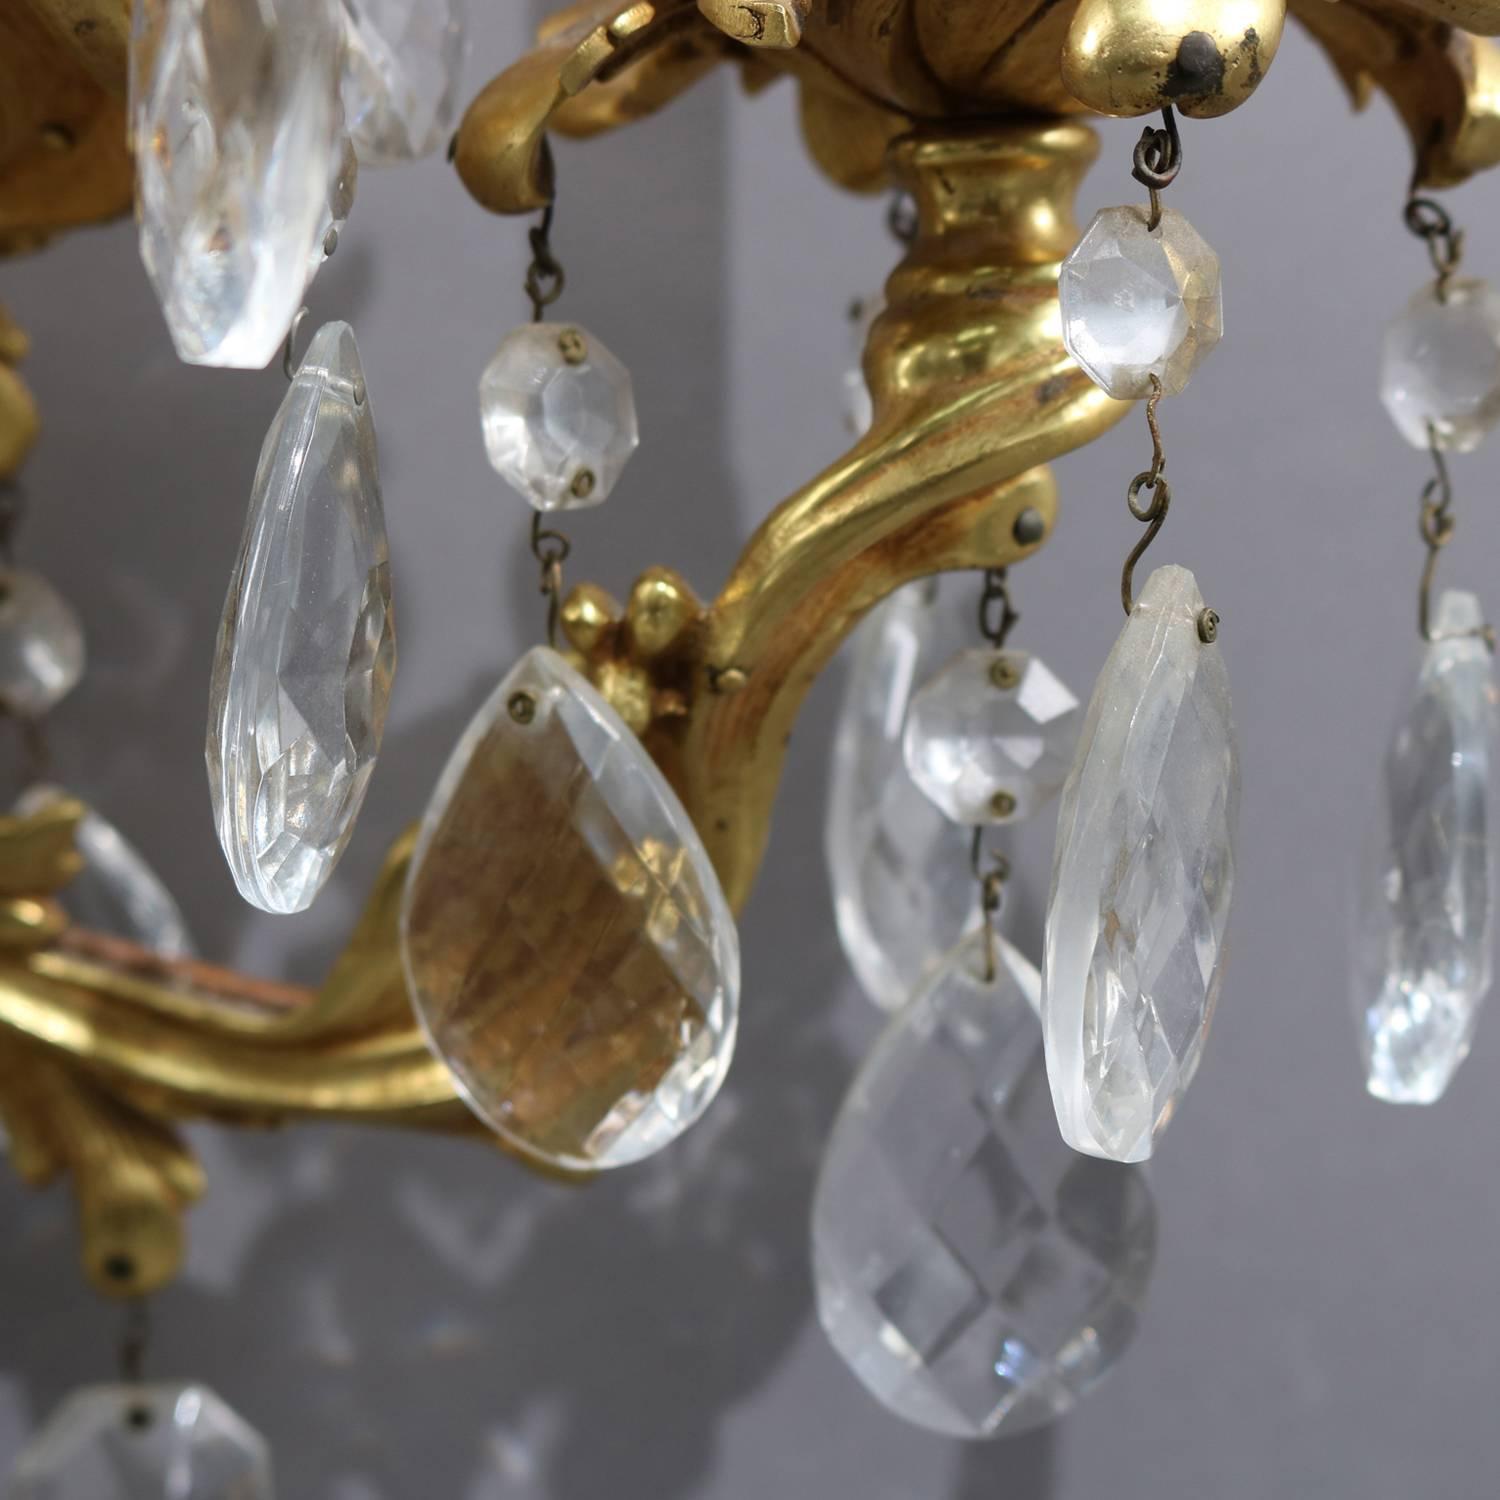 Oversized French Rococo Foliate Form Gilt Bronze Cut Crystal Wall Sconces 1